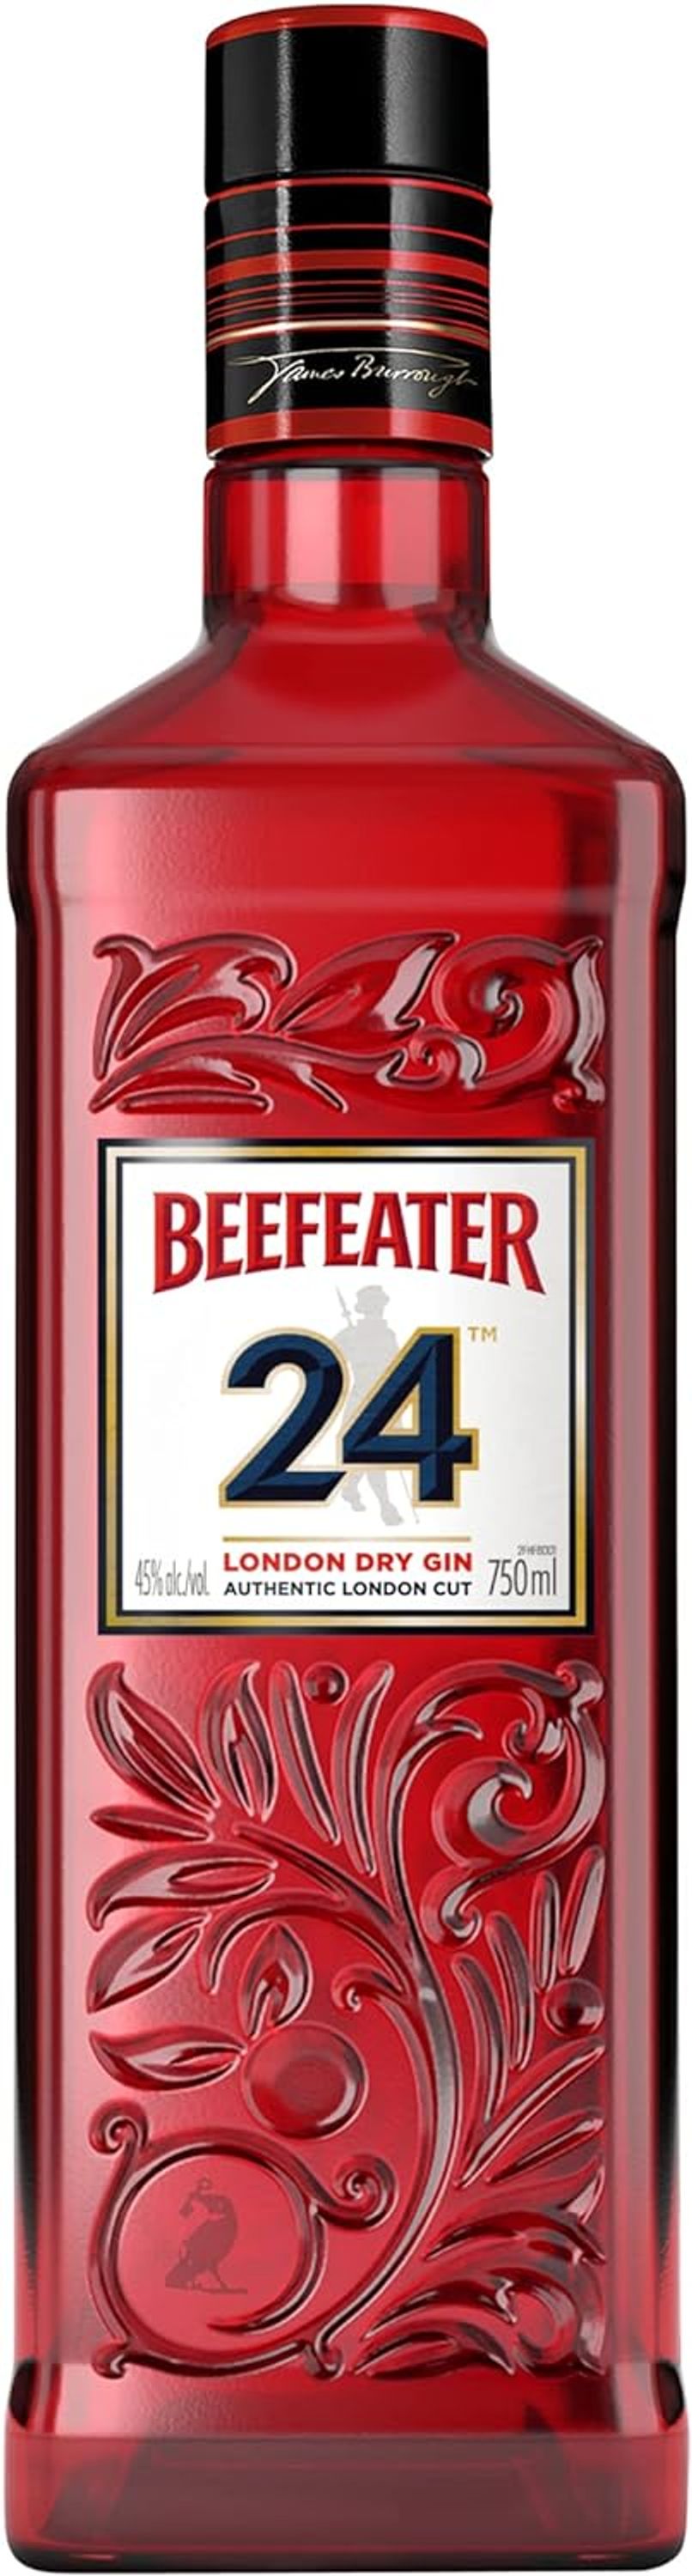 Beefeater 24 London Dry Gin 0,7l, alc. 45 Vol.-%